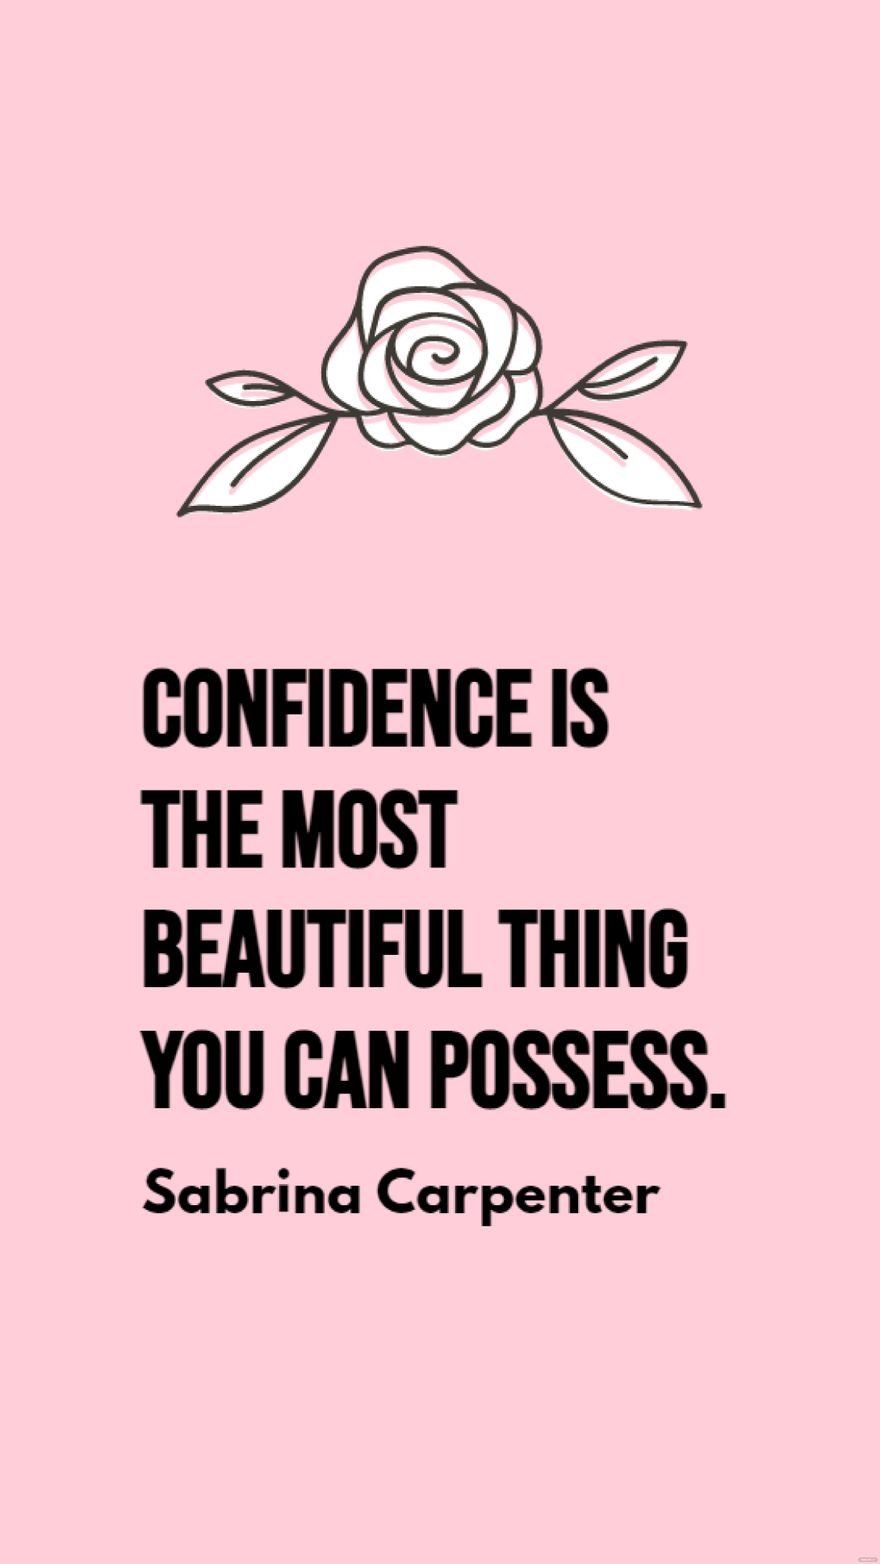 Sabrina Carpenter - Confidence is the most beautiful thing you can possess.